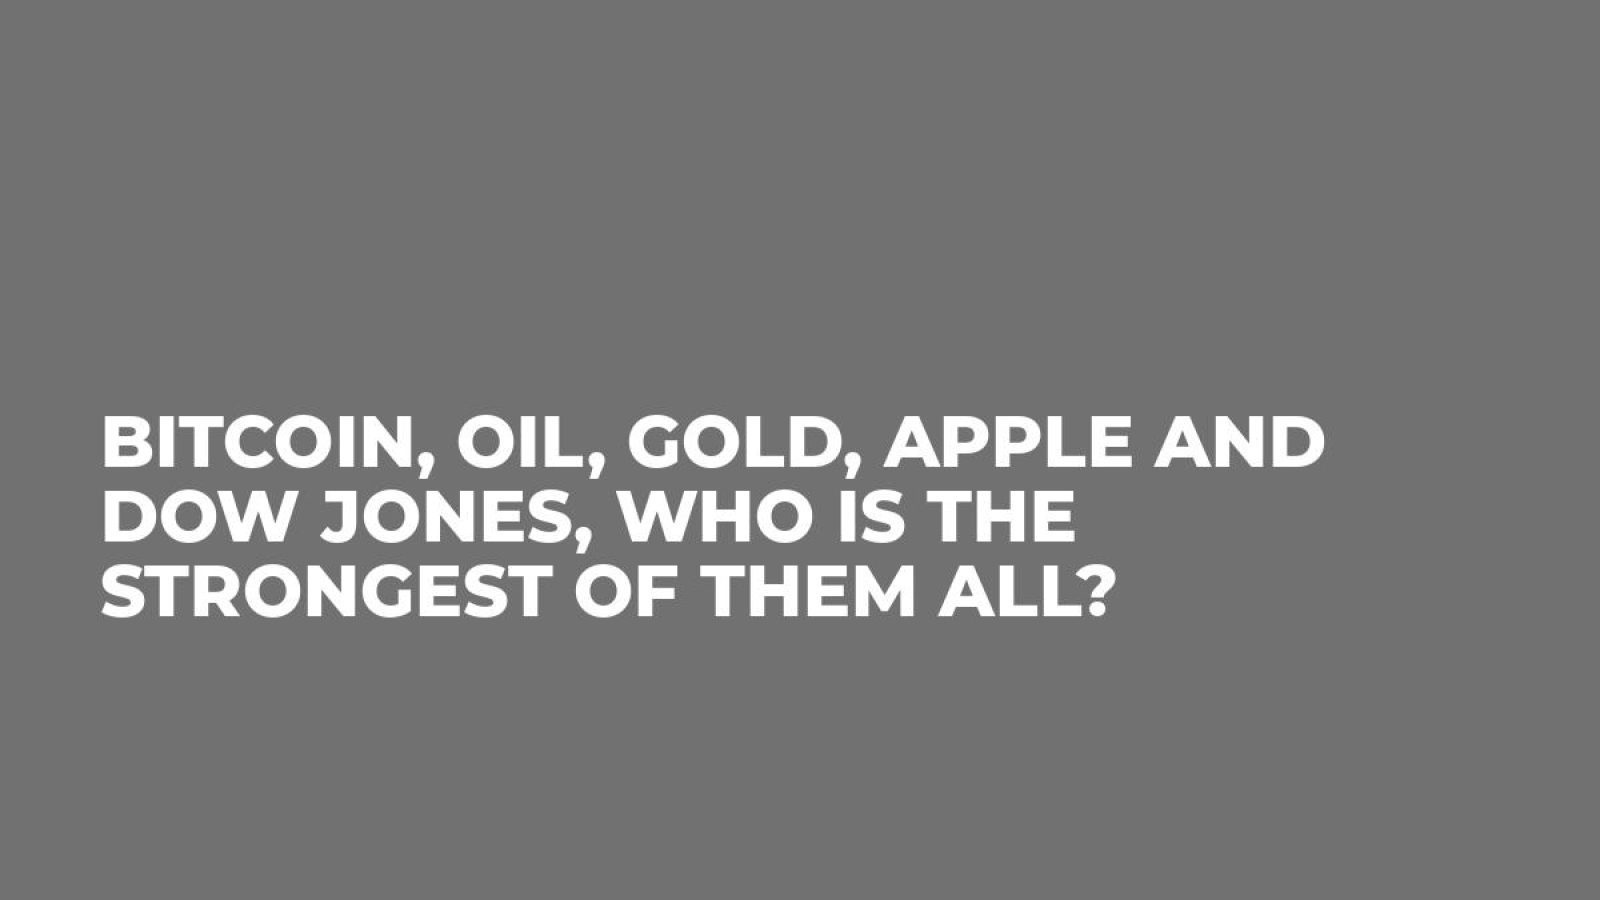 Bitcoin, Oil, Gold, Apple and Dow Jones, Who is the Strongest of Them All?